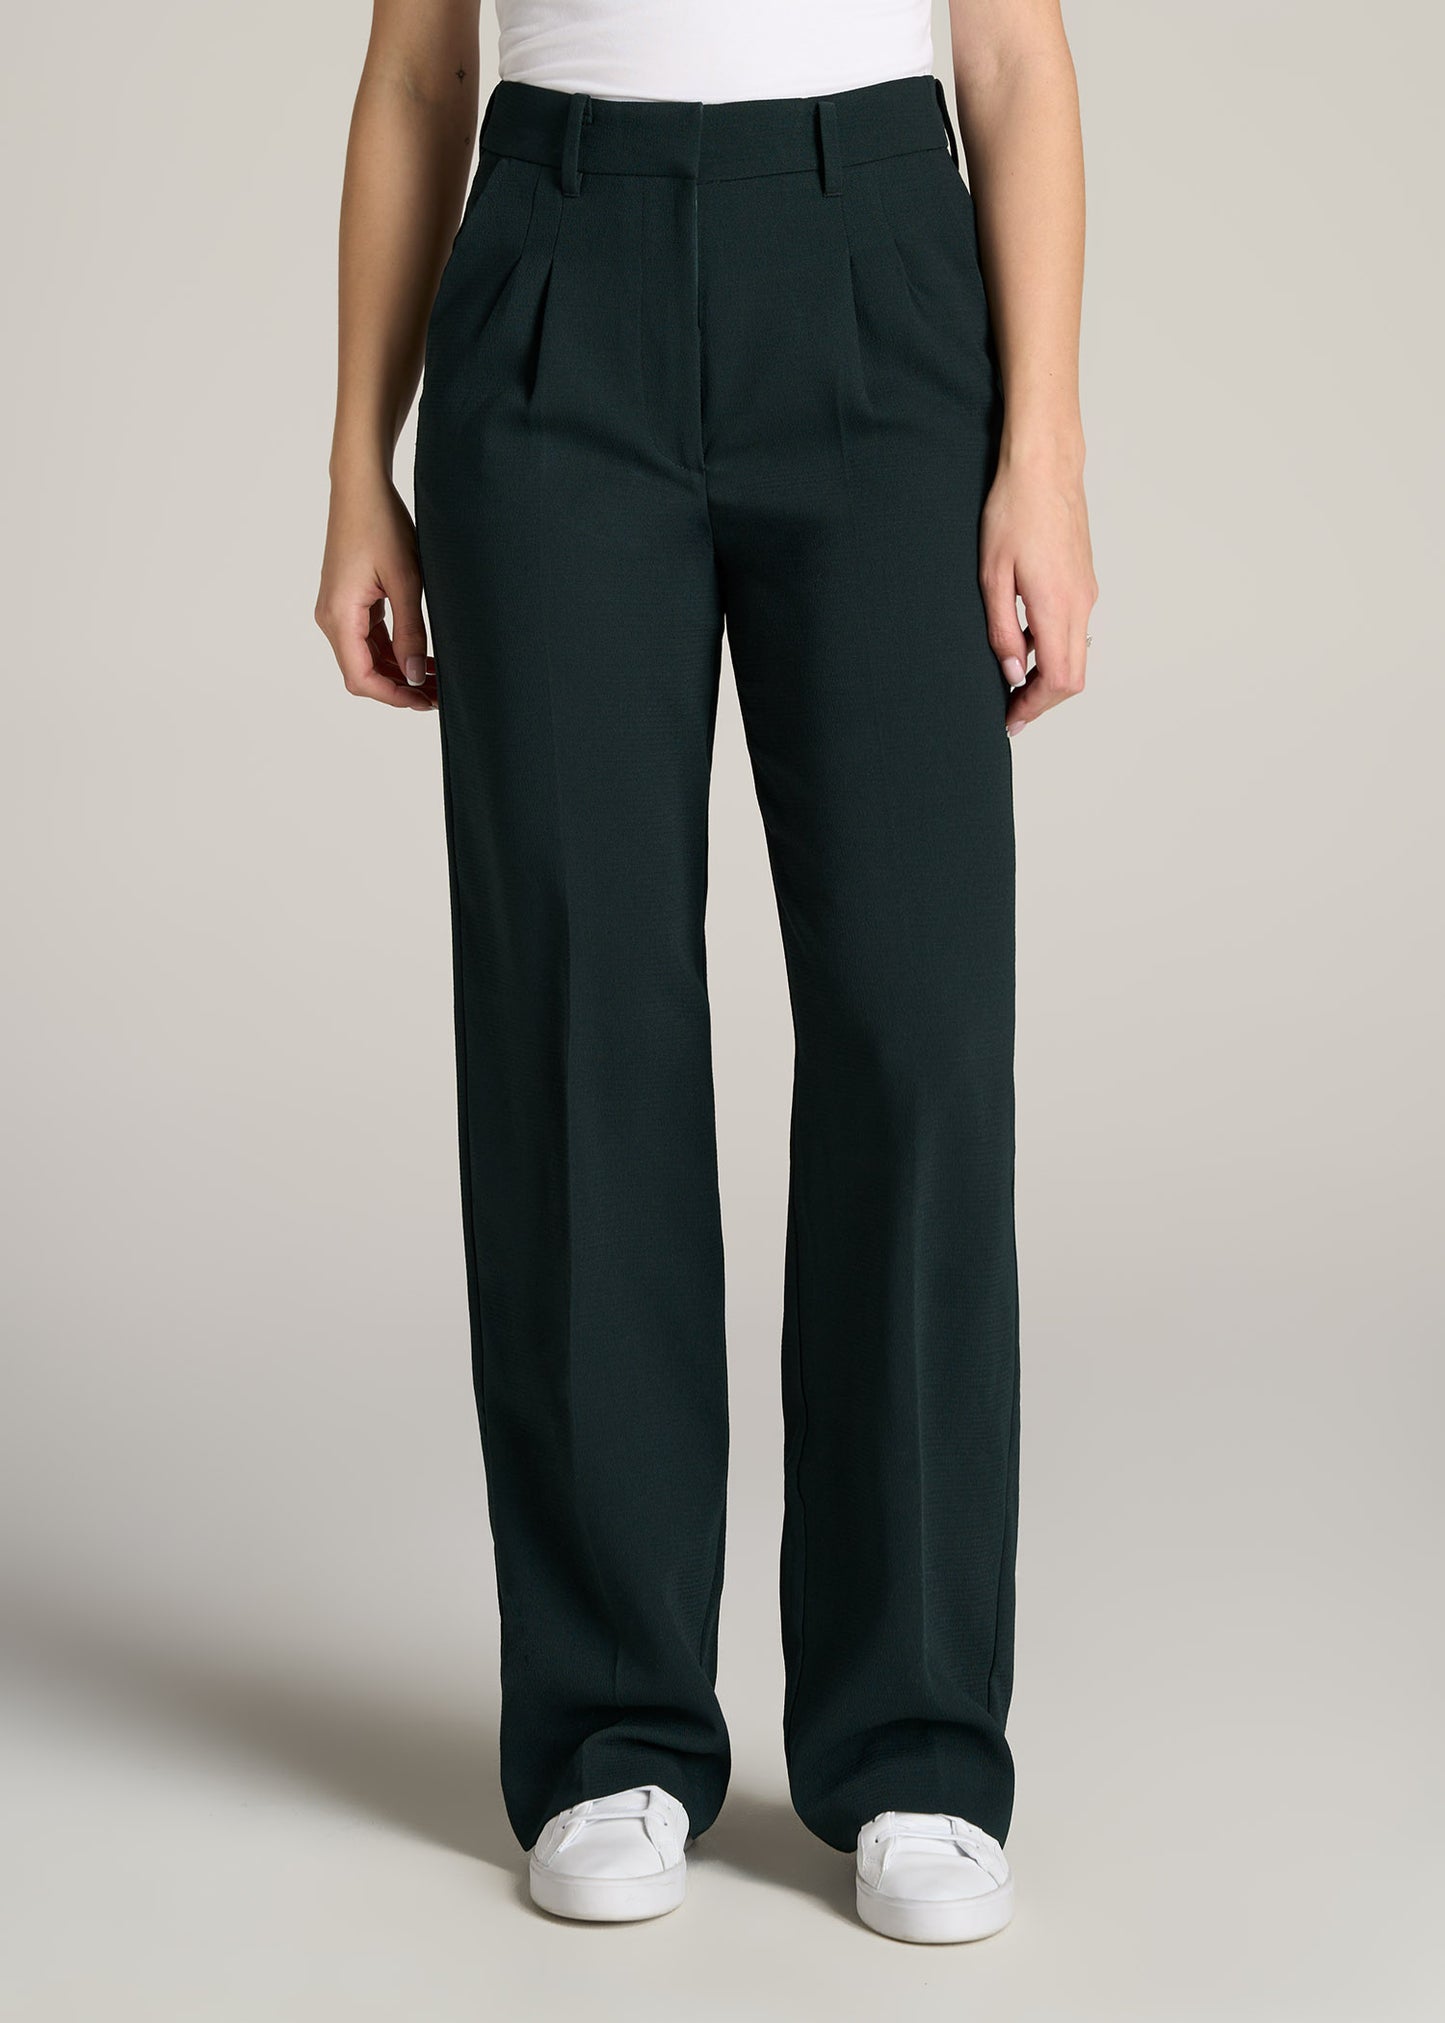 Women's Dress Pants With Pockets